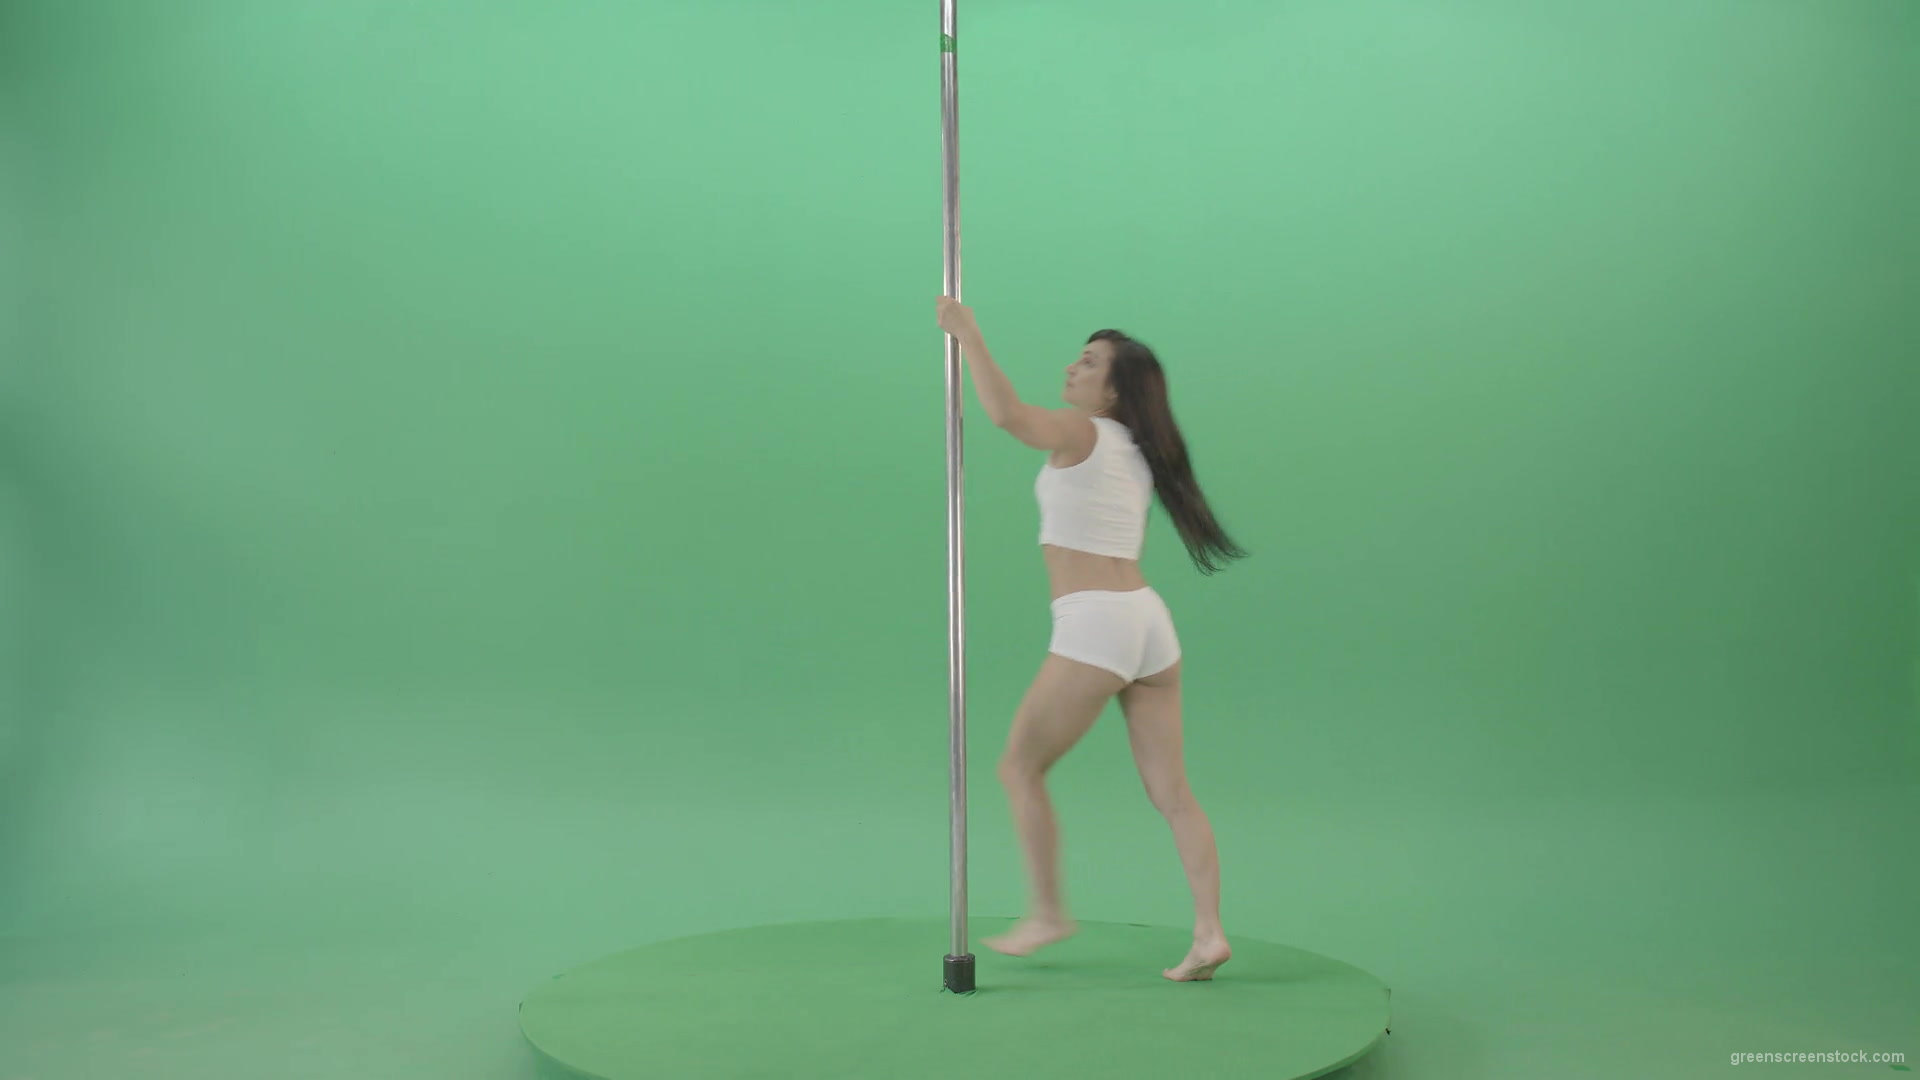 Go-Go-Girl-in-white-dress-spinning-on-the-pole-and-sit-on-a-twine-on-green-screen-4K-Video-Footage-1920_002 Green Screen Stock